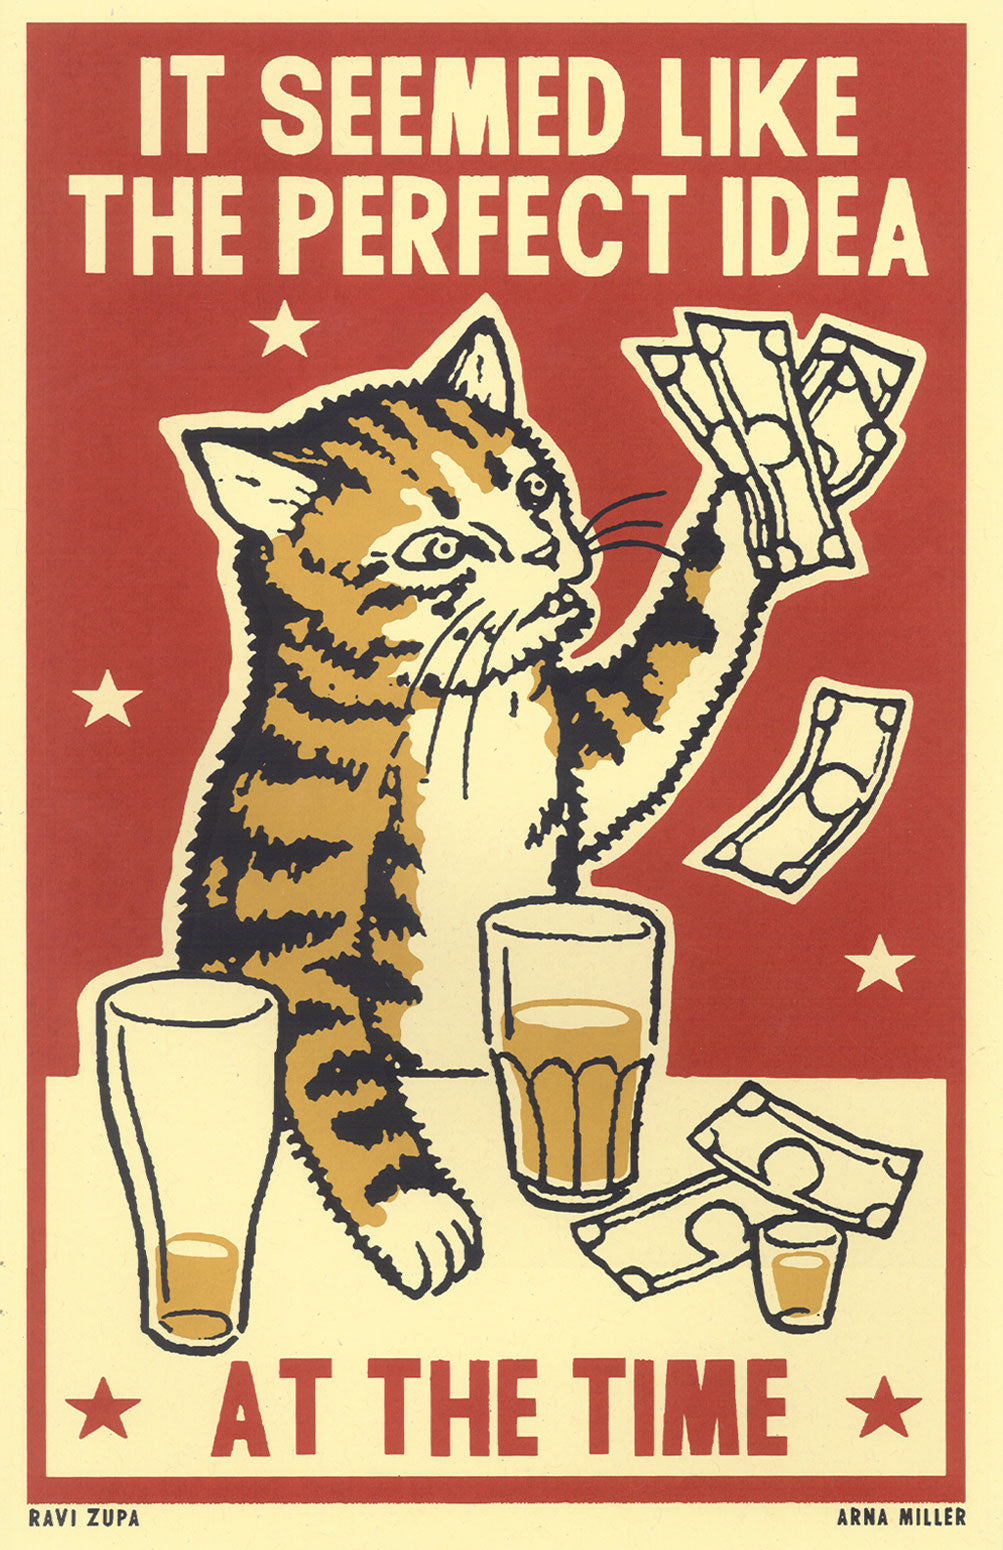 Drunk Cat Series Print - It Seemed Like the Perfect Idea At the Time - By Arna Miller and Ravi Zupa